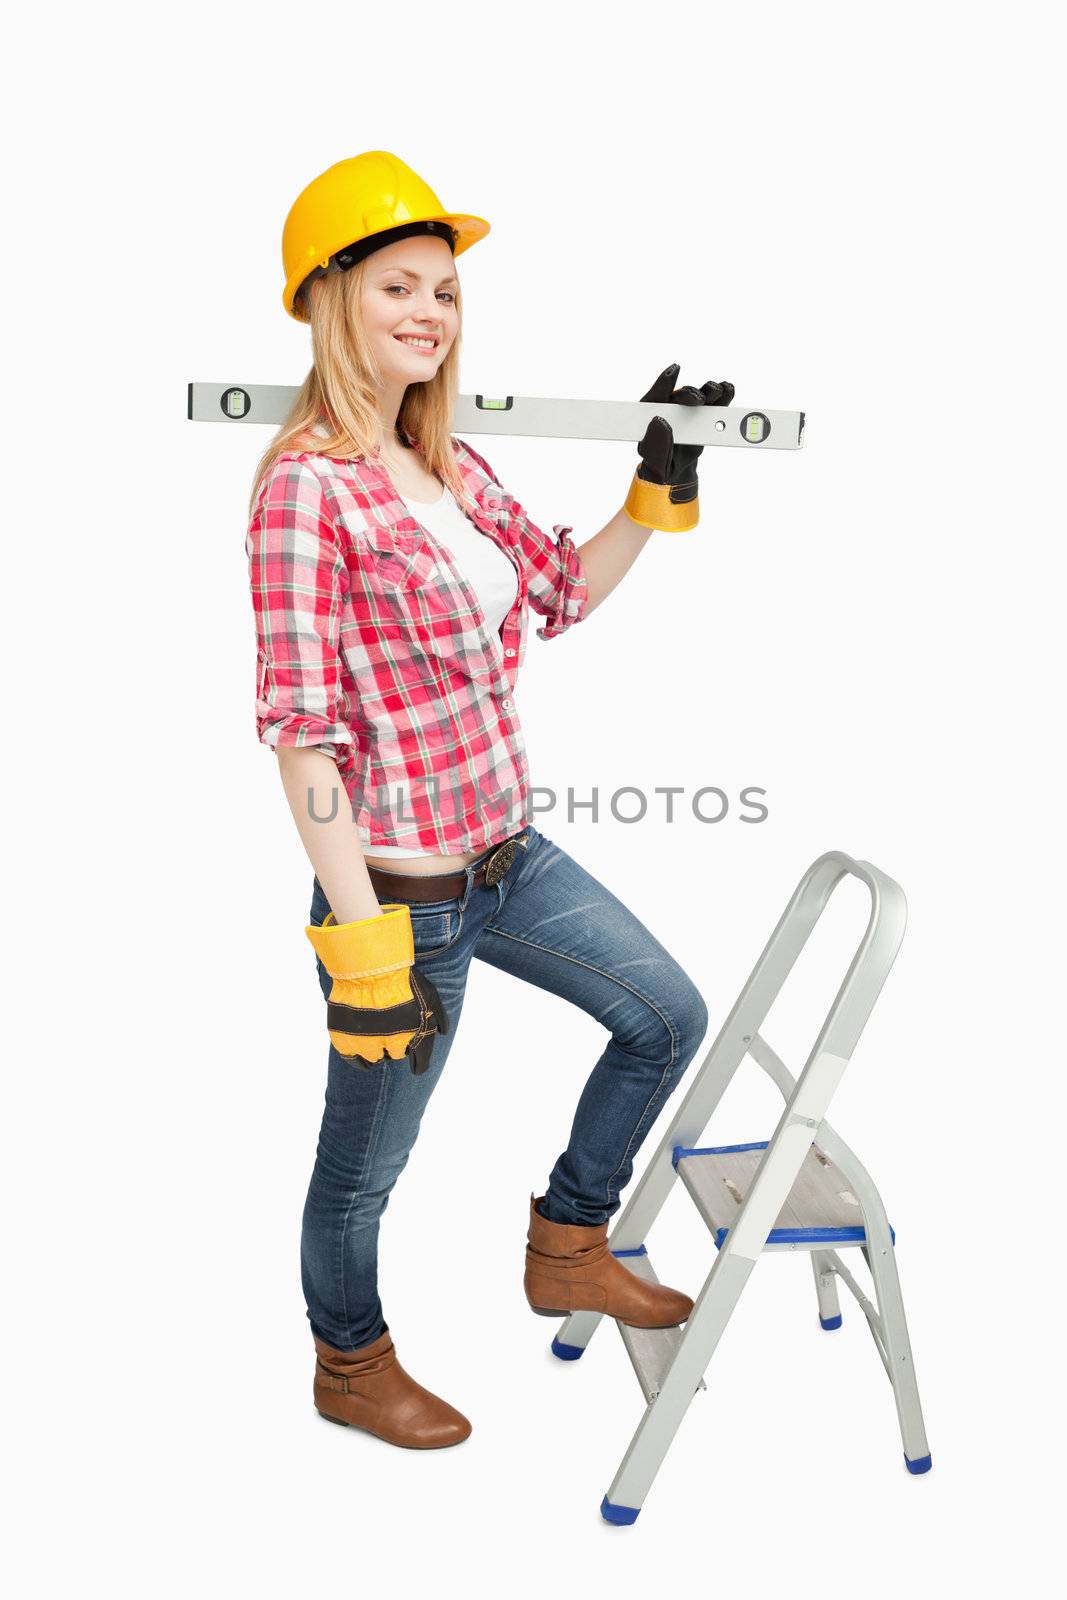 Woman holding a spirit level next to a step ladder against white background